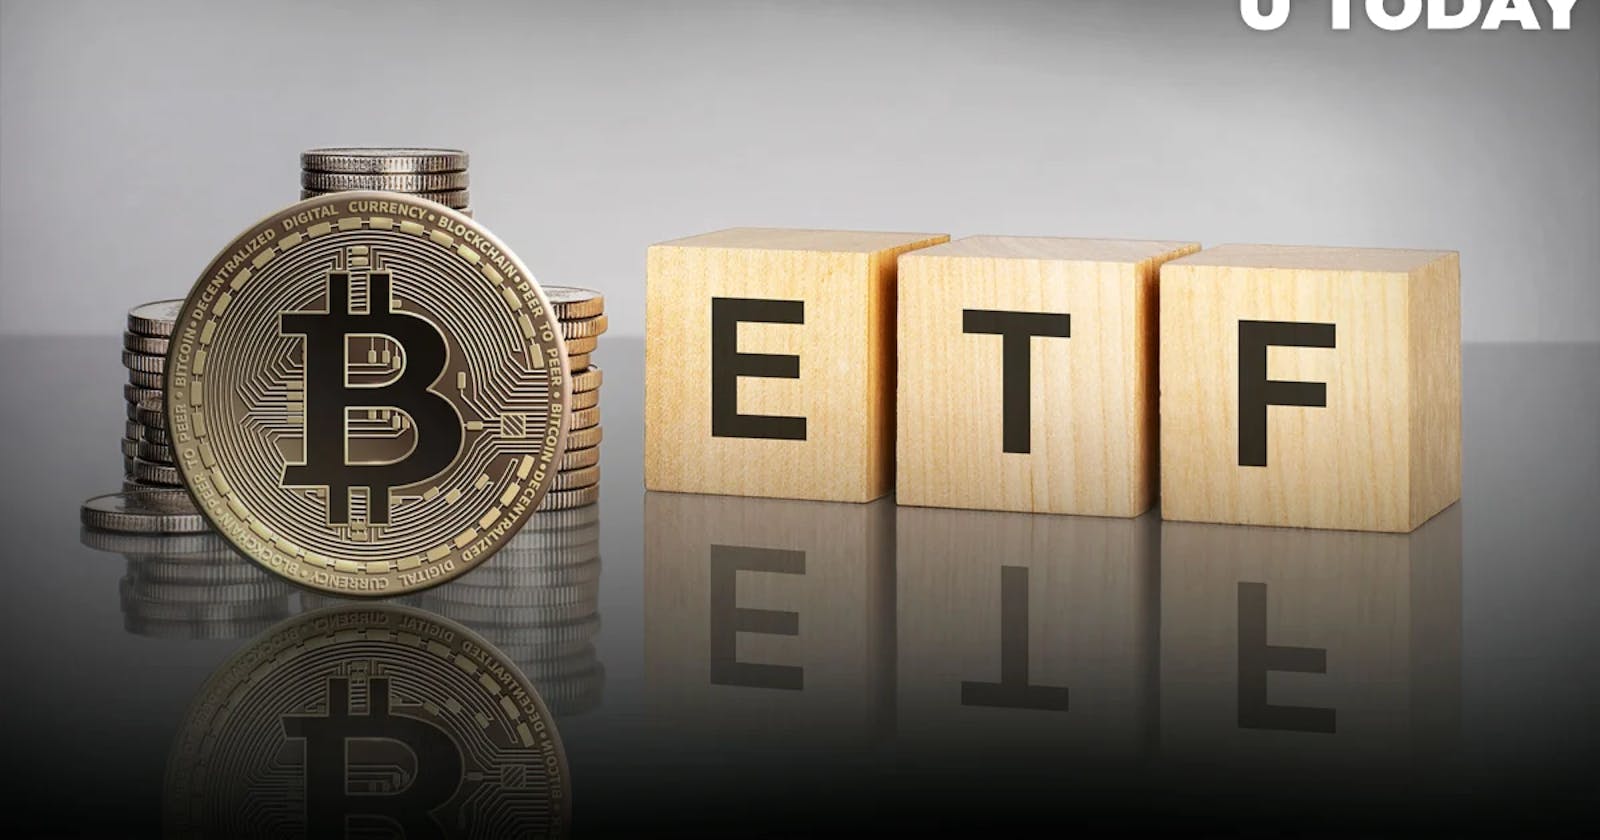 #Bitcoin   ETF FINALLY APPROVED, What's the hype all about?